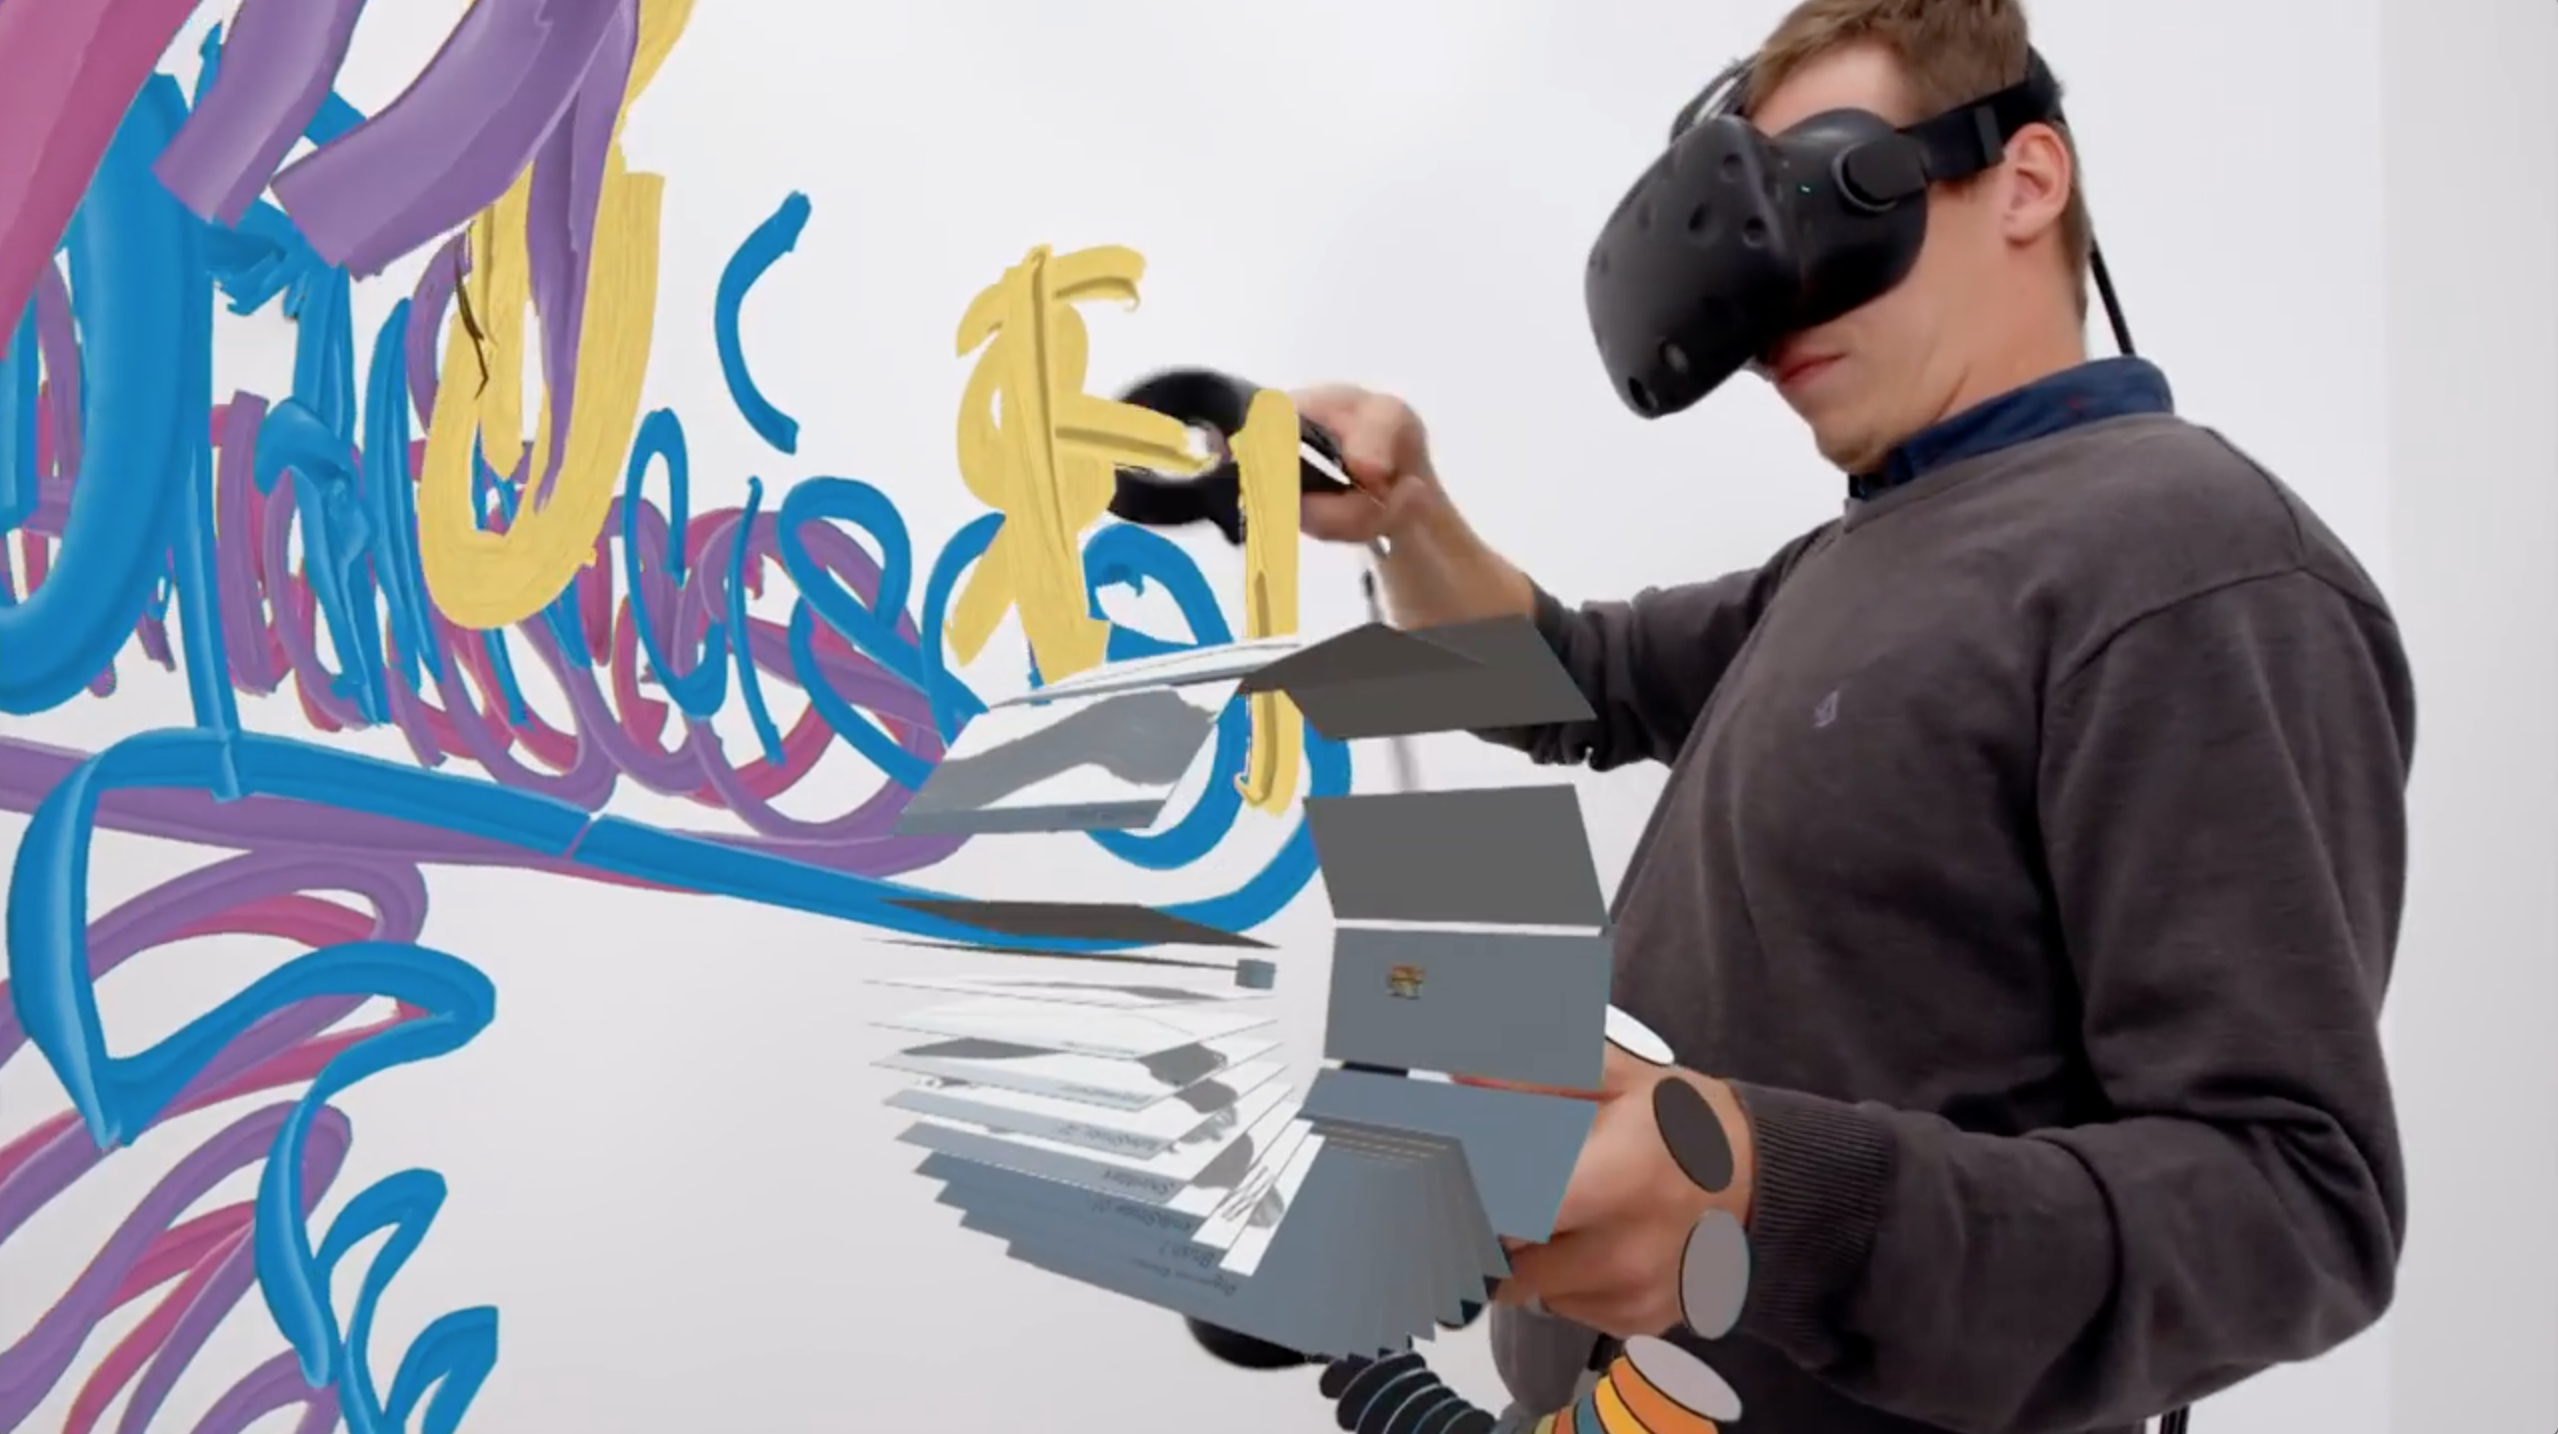 hardware Gum fryser Adobe Introduces VR Drawing Experience Project Dali - VRScout